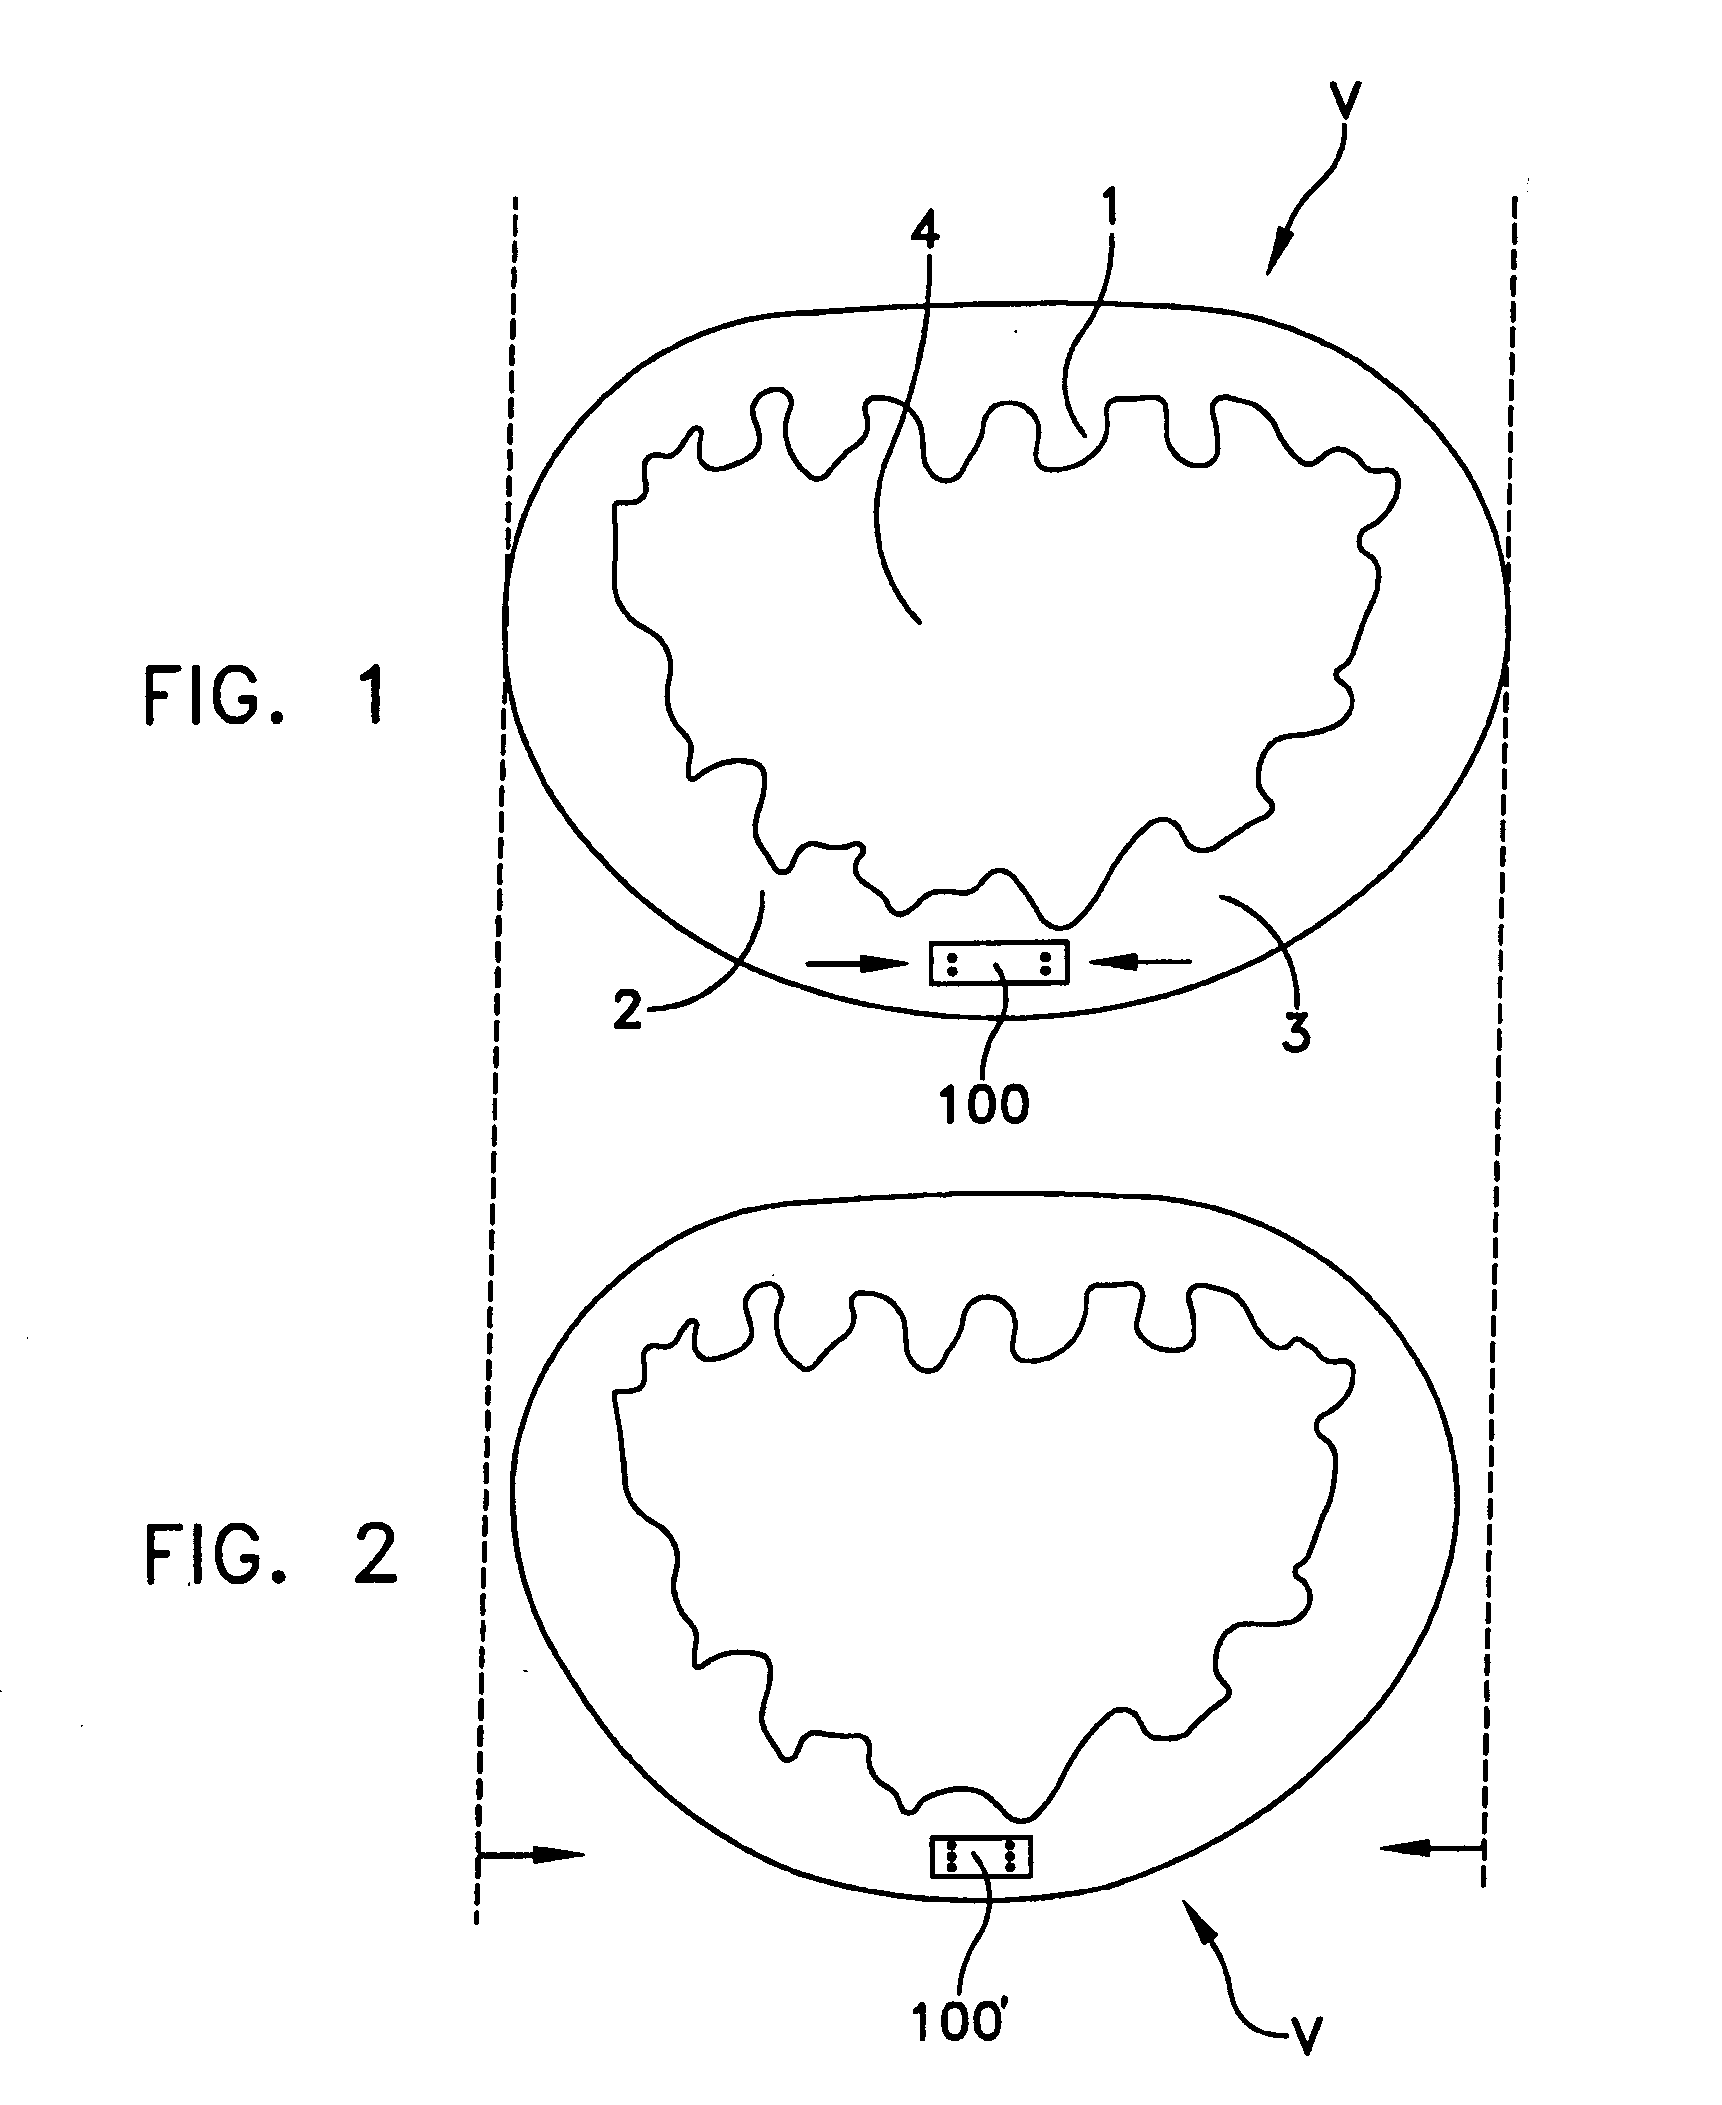 Automated annular plication for mitral valve repair